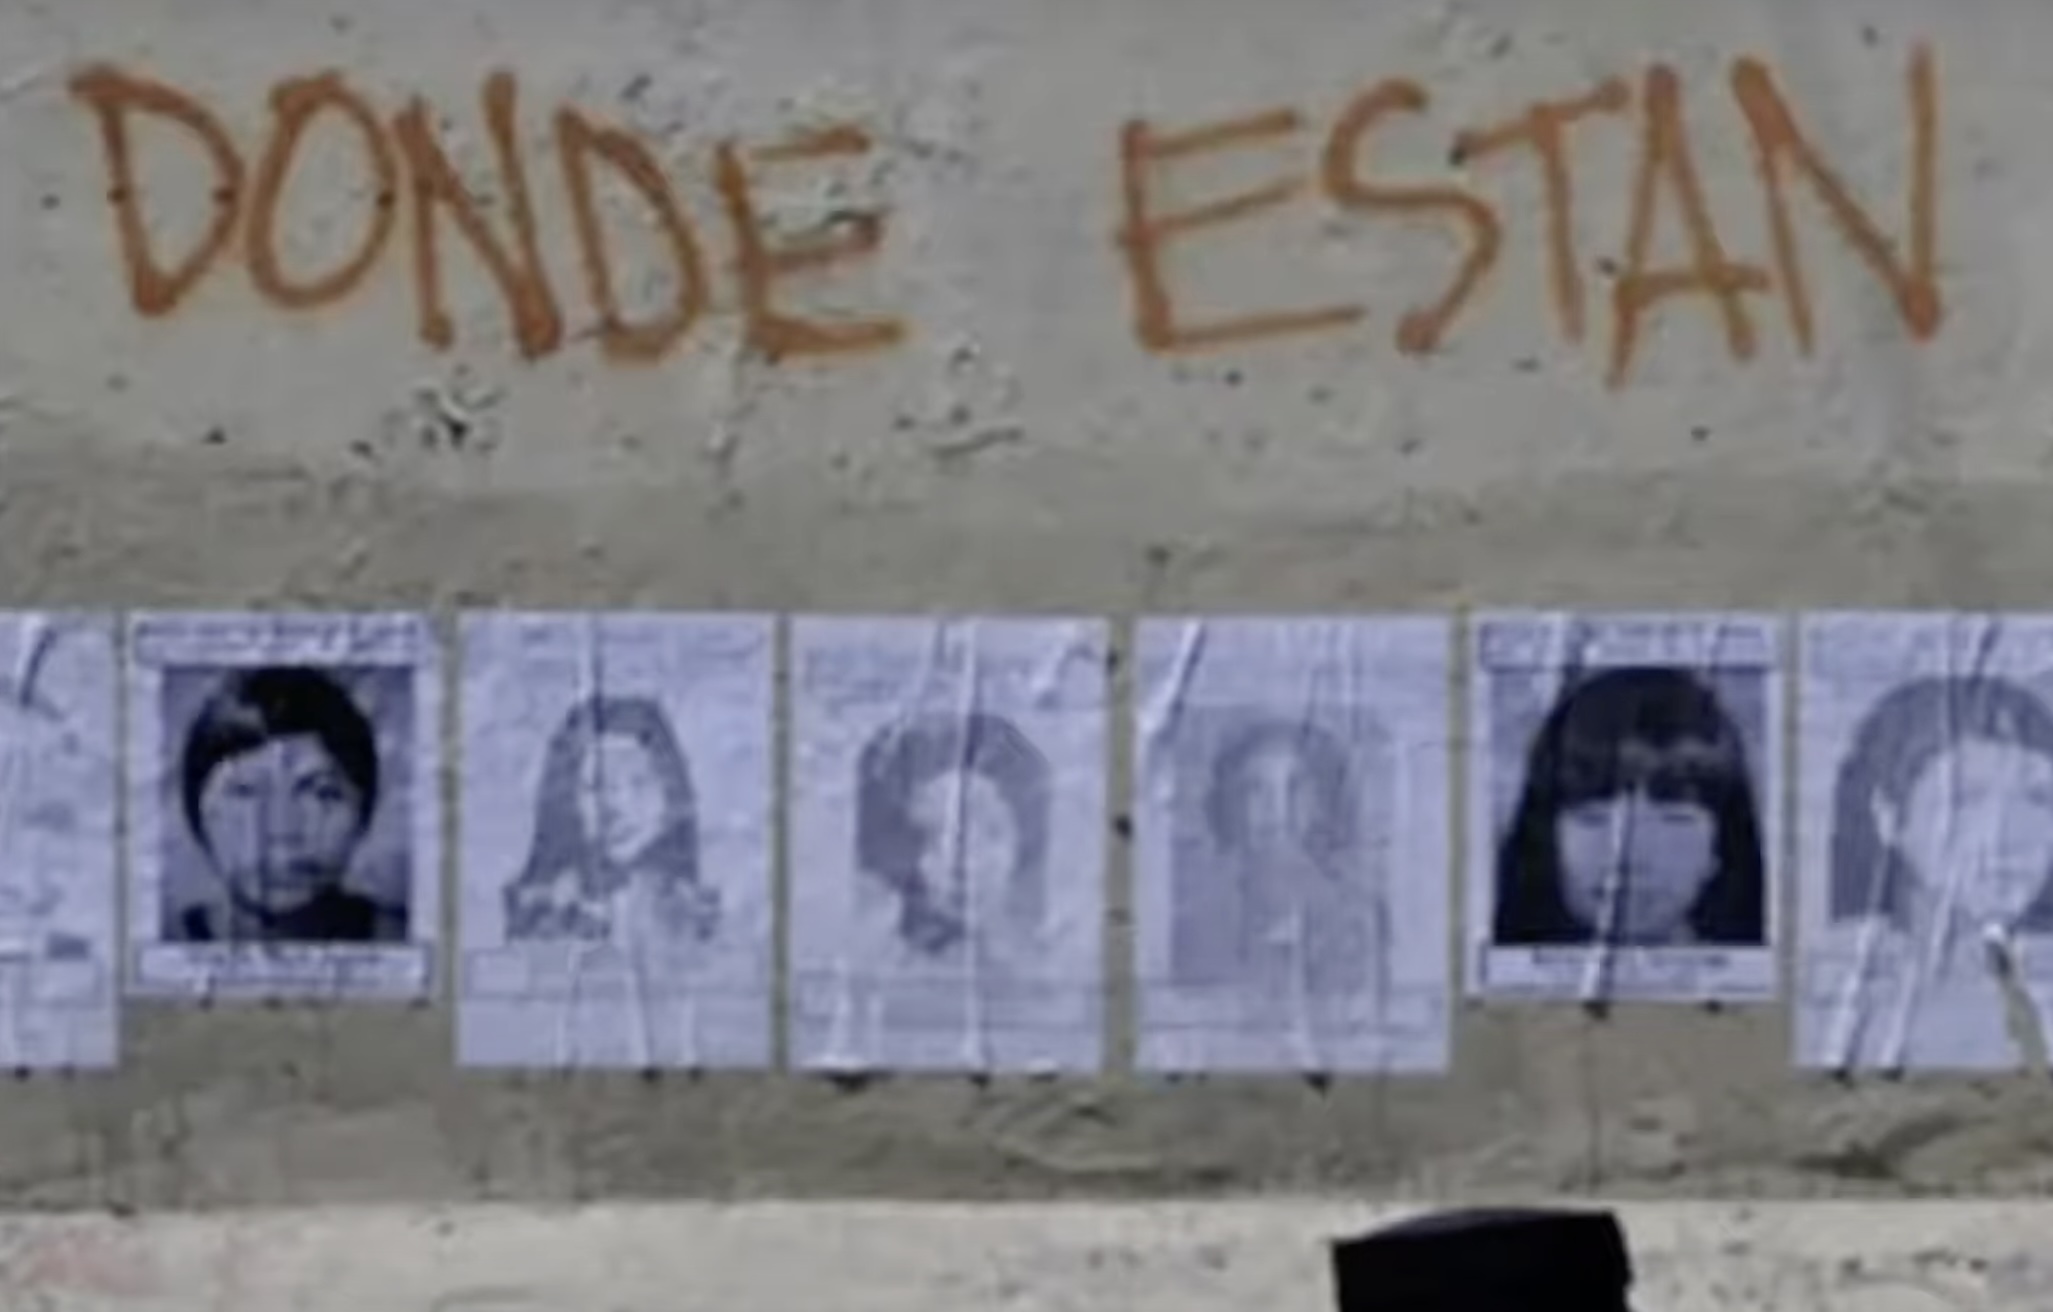 Wall in Terceravia, Mexico, with graffiti words, "Donde Estan." Photos of women's faces underneath.